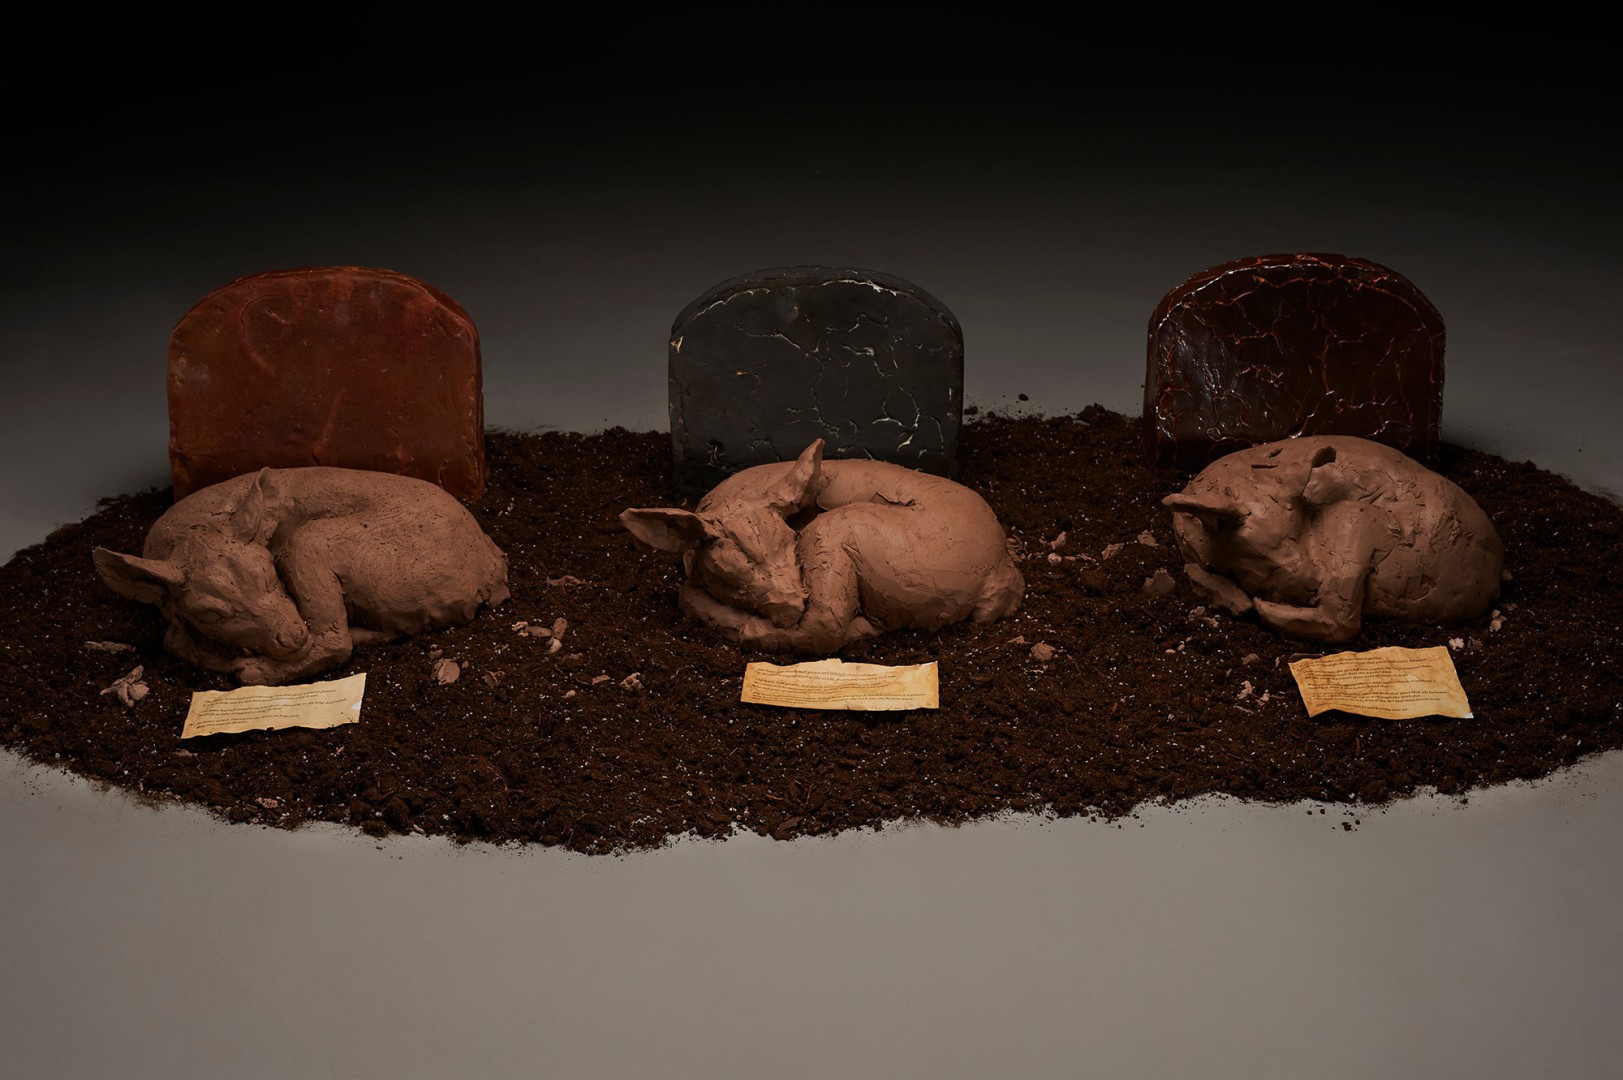 Three ceramic sculptures of pigs laying next to graves.